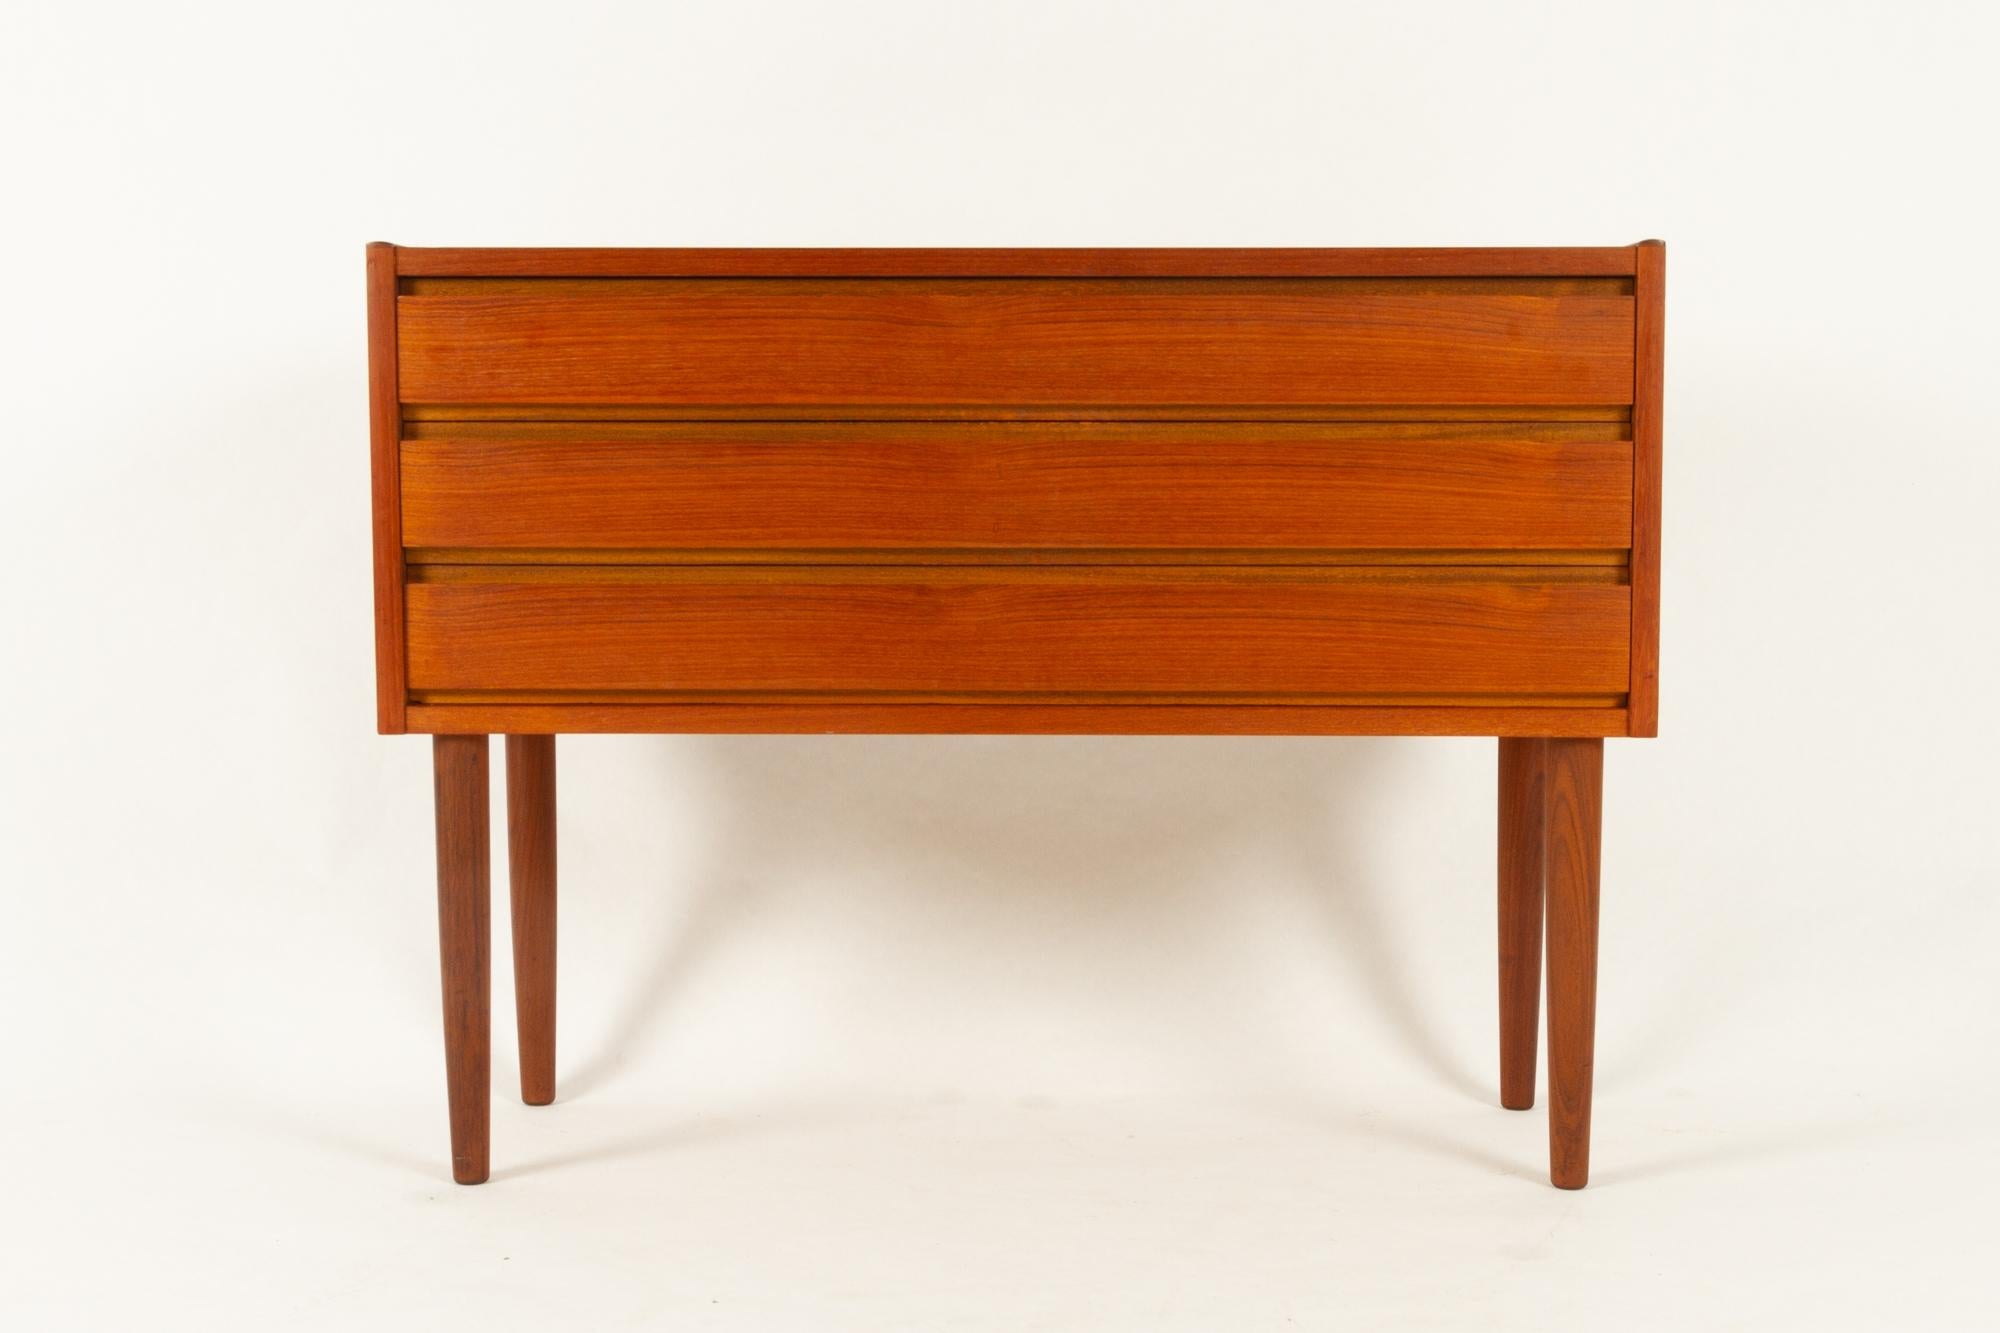 Danish teak dresser, 1960s
Small and elegant teak dresser with three wide drawers and round tapered legs. Recessed handles.
Original price sticker still on the back.
Very good vintage condition. Gently cleaned, oiled and polished. Ready for use.